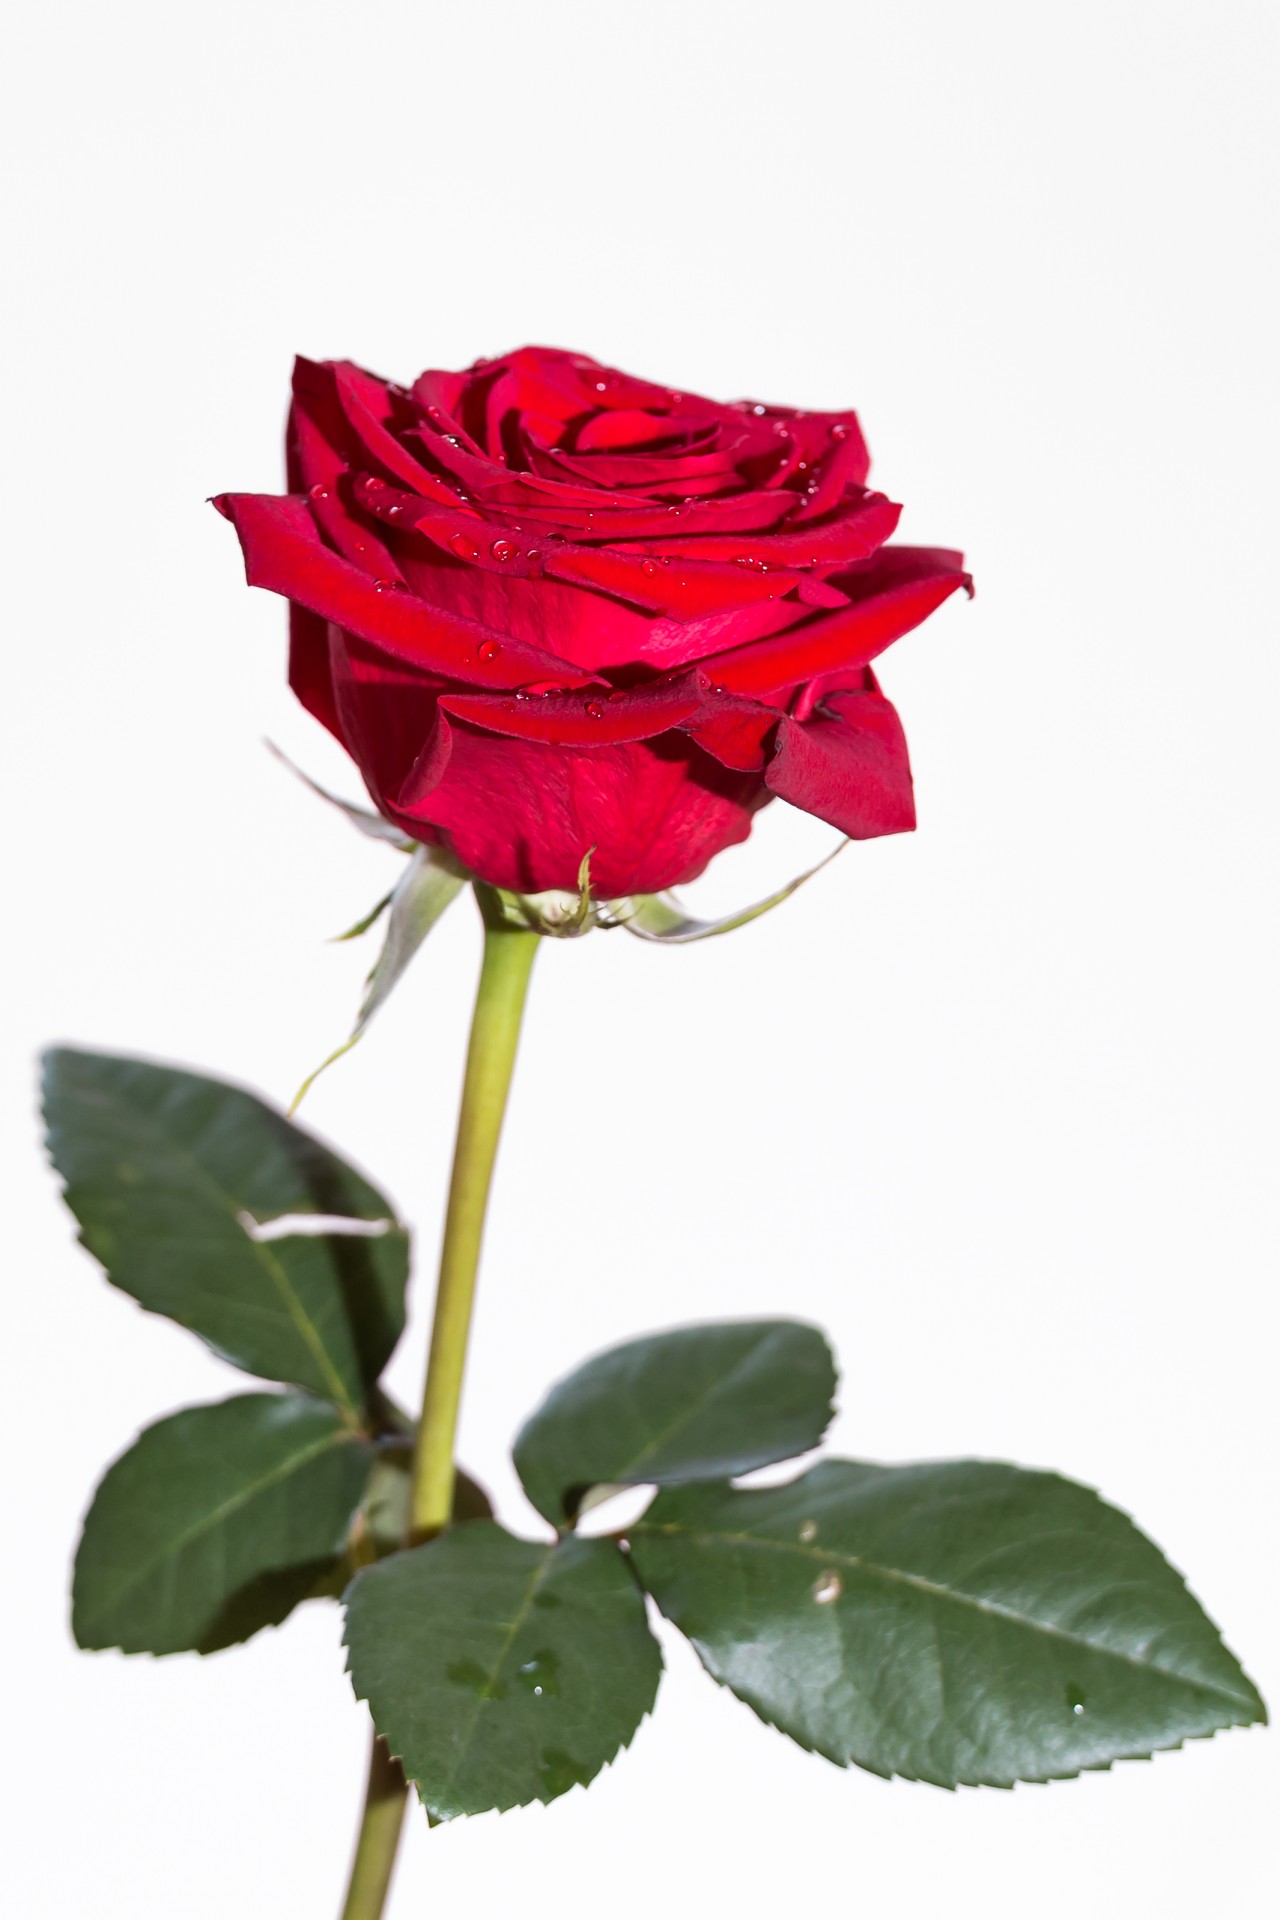 Red Rose On White Background Free Stock Photo HD   Public Domain